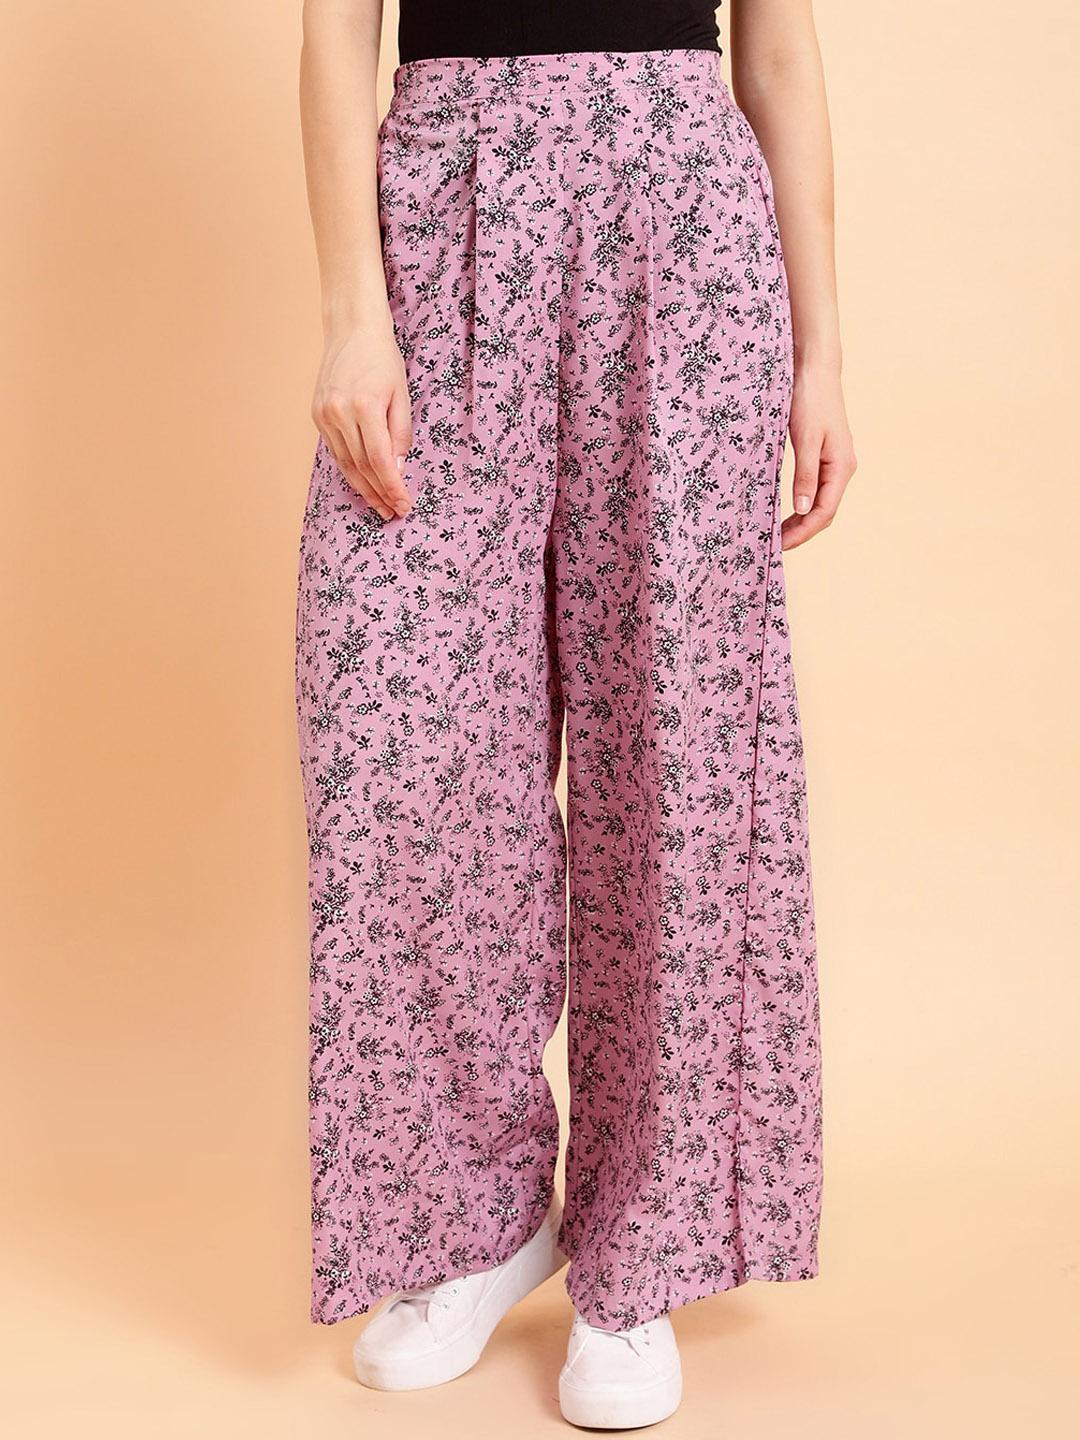 mint-street-women-floral-printed-mid-rise-plain-parallel-trousers